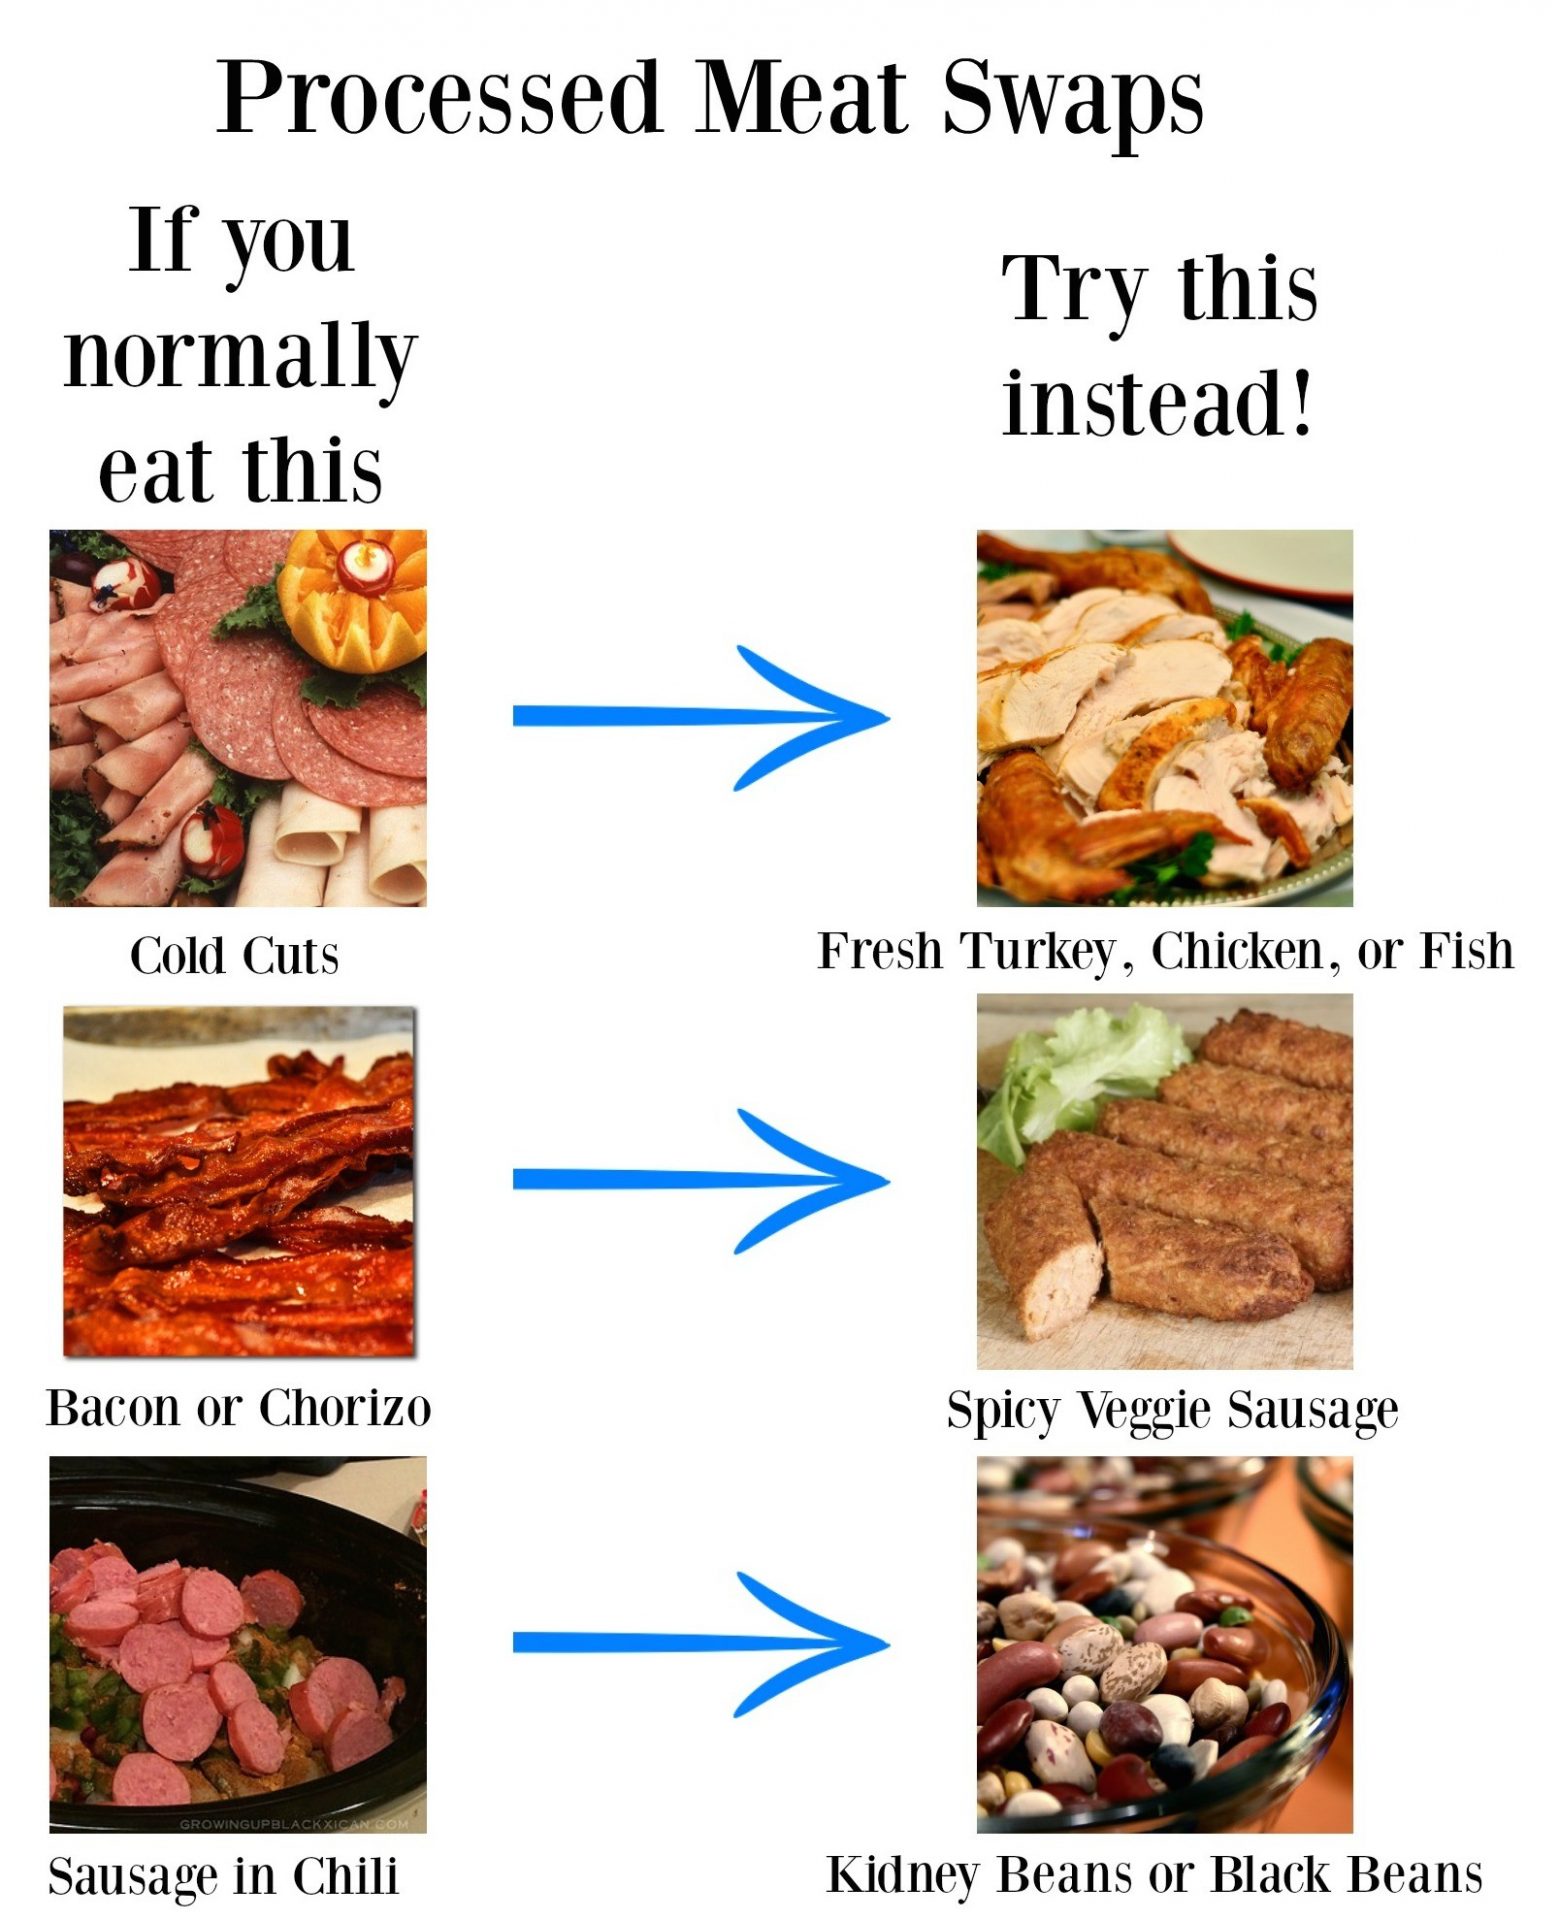 Tips For Avoiding Processed Meat and Choosing Healthier Options